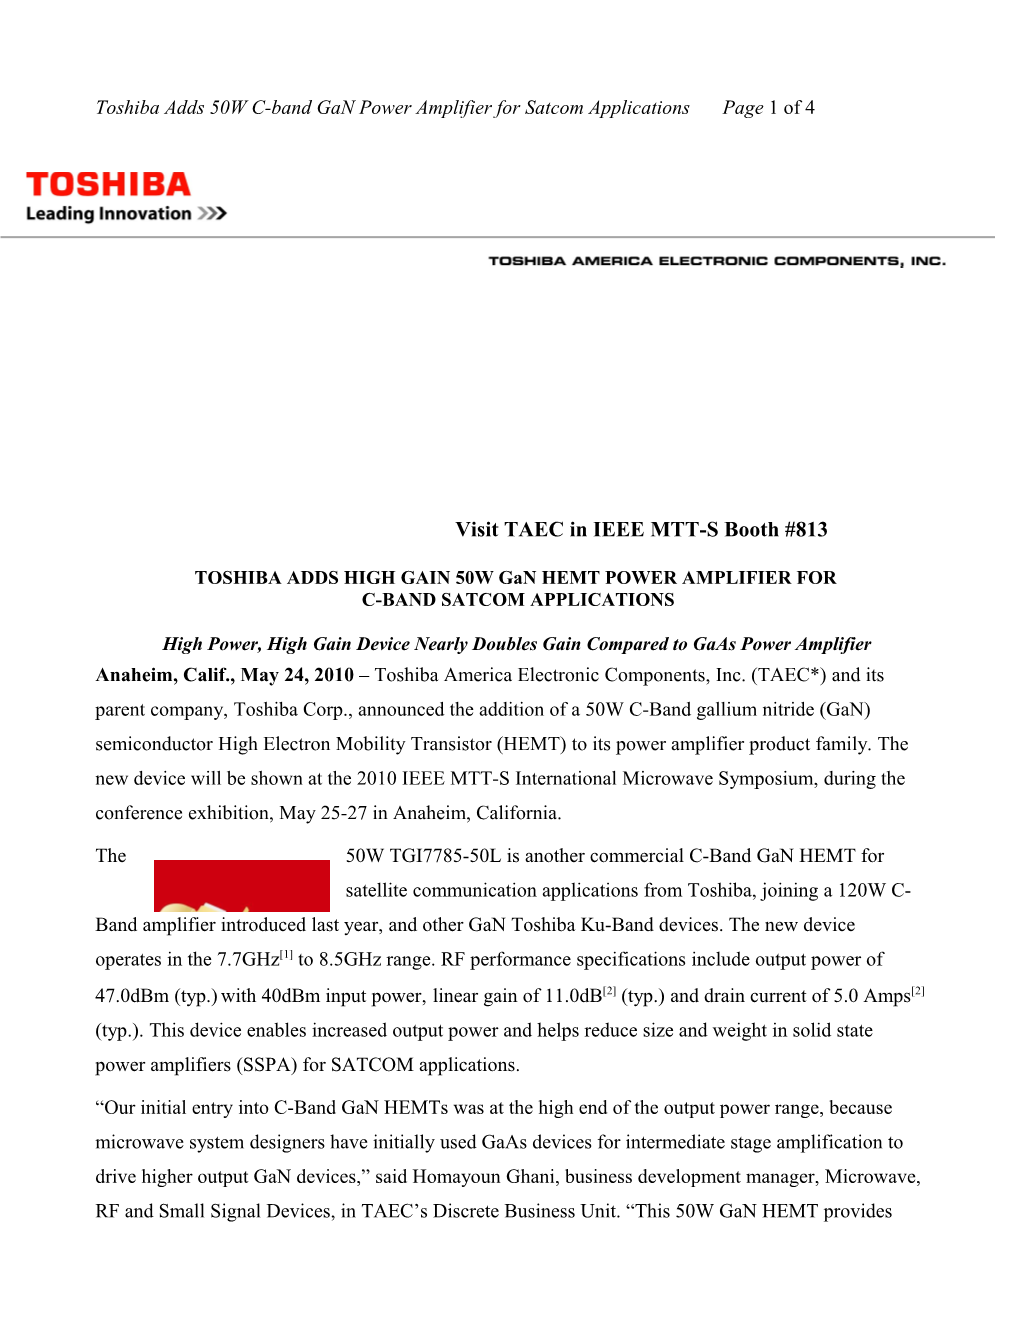 Toshiba Adds 50W C-Band Gan Power Amplifier for Satcom Applications Page 1 of 4